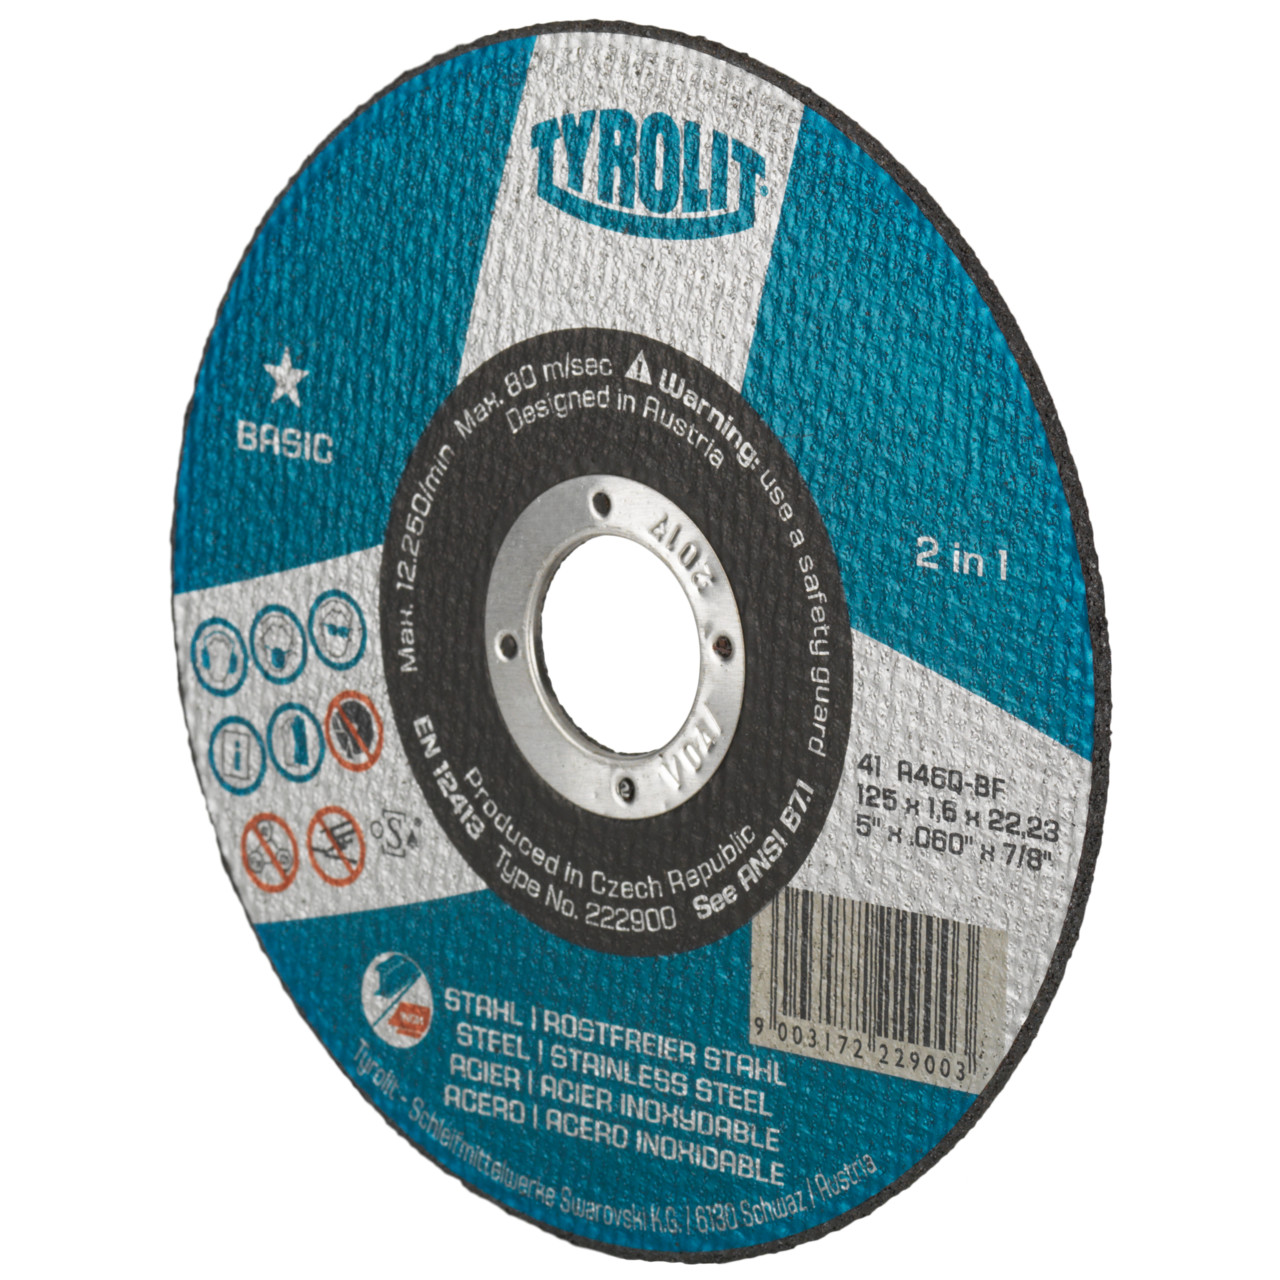 Tyrolit Cutting discs DxDxH 115x1.0x22.23 2in1 for steel and stainless steel, shape: 41 - straight version, Art. 34332870